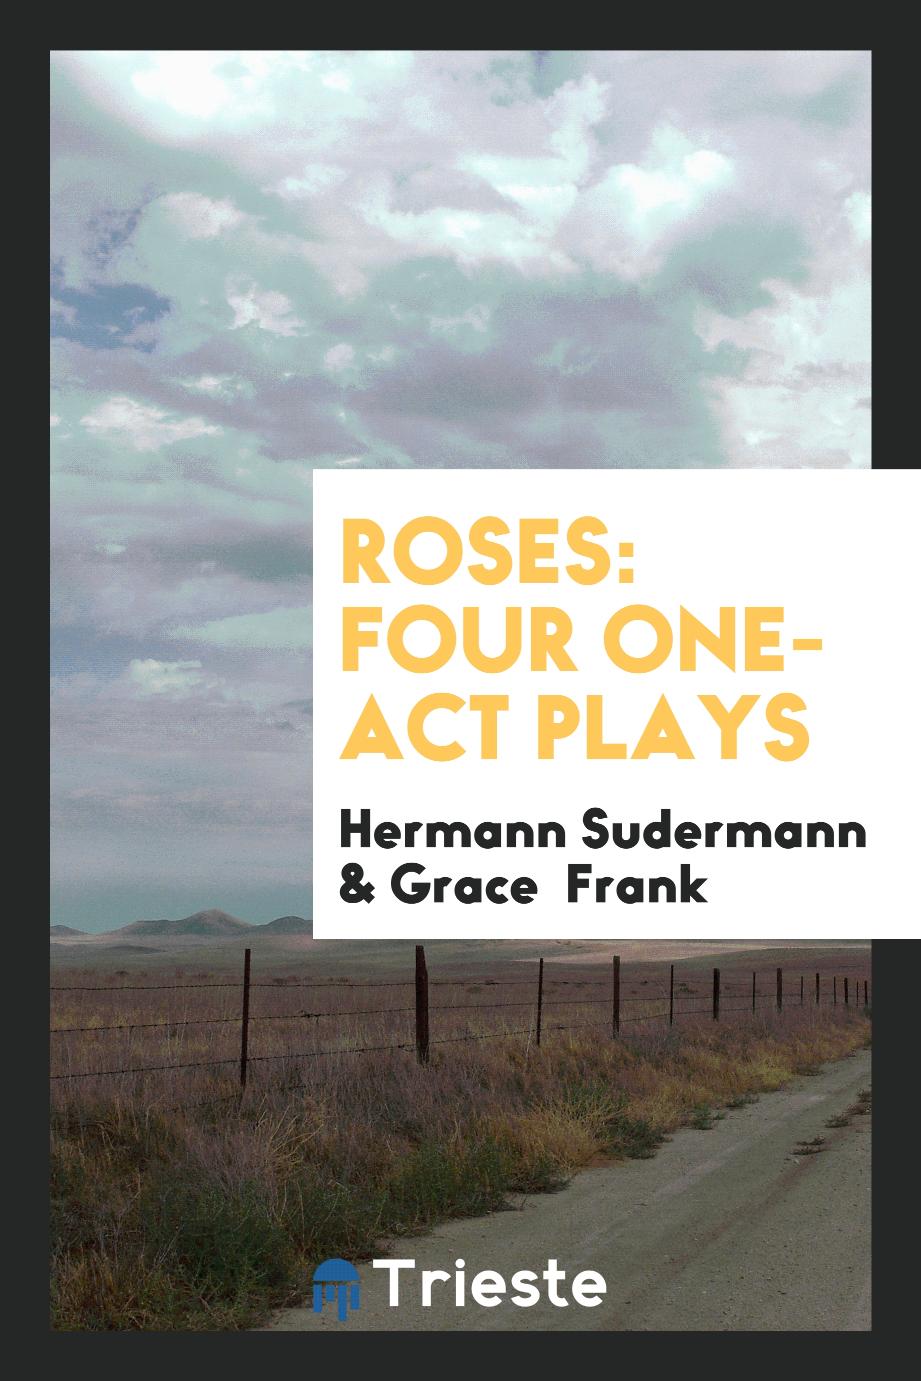 Roses: four one-act plays